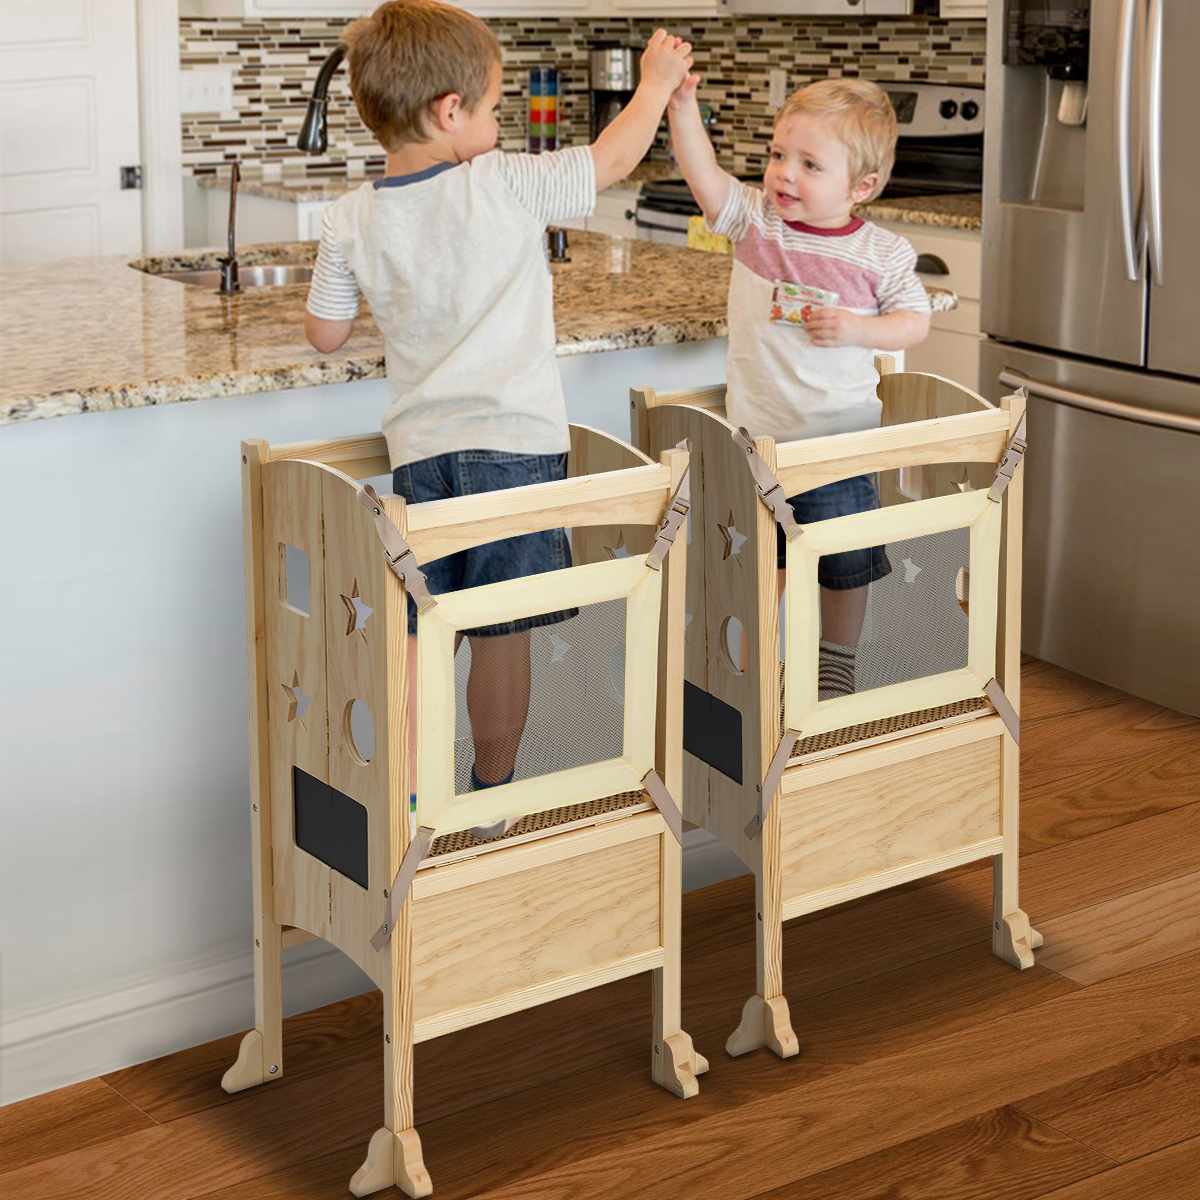 Learning tower Kitchen Helper Kitchen stool Safety stool Toddler step stool Kid Step Stool Activity tower Montessori tower Stepping stool 